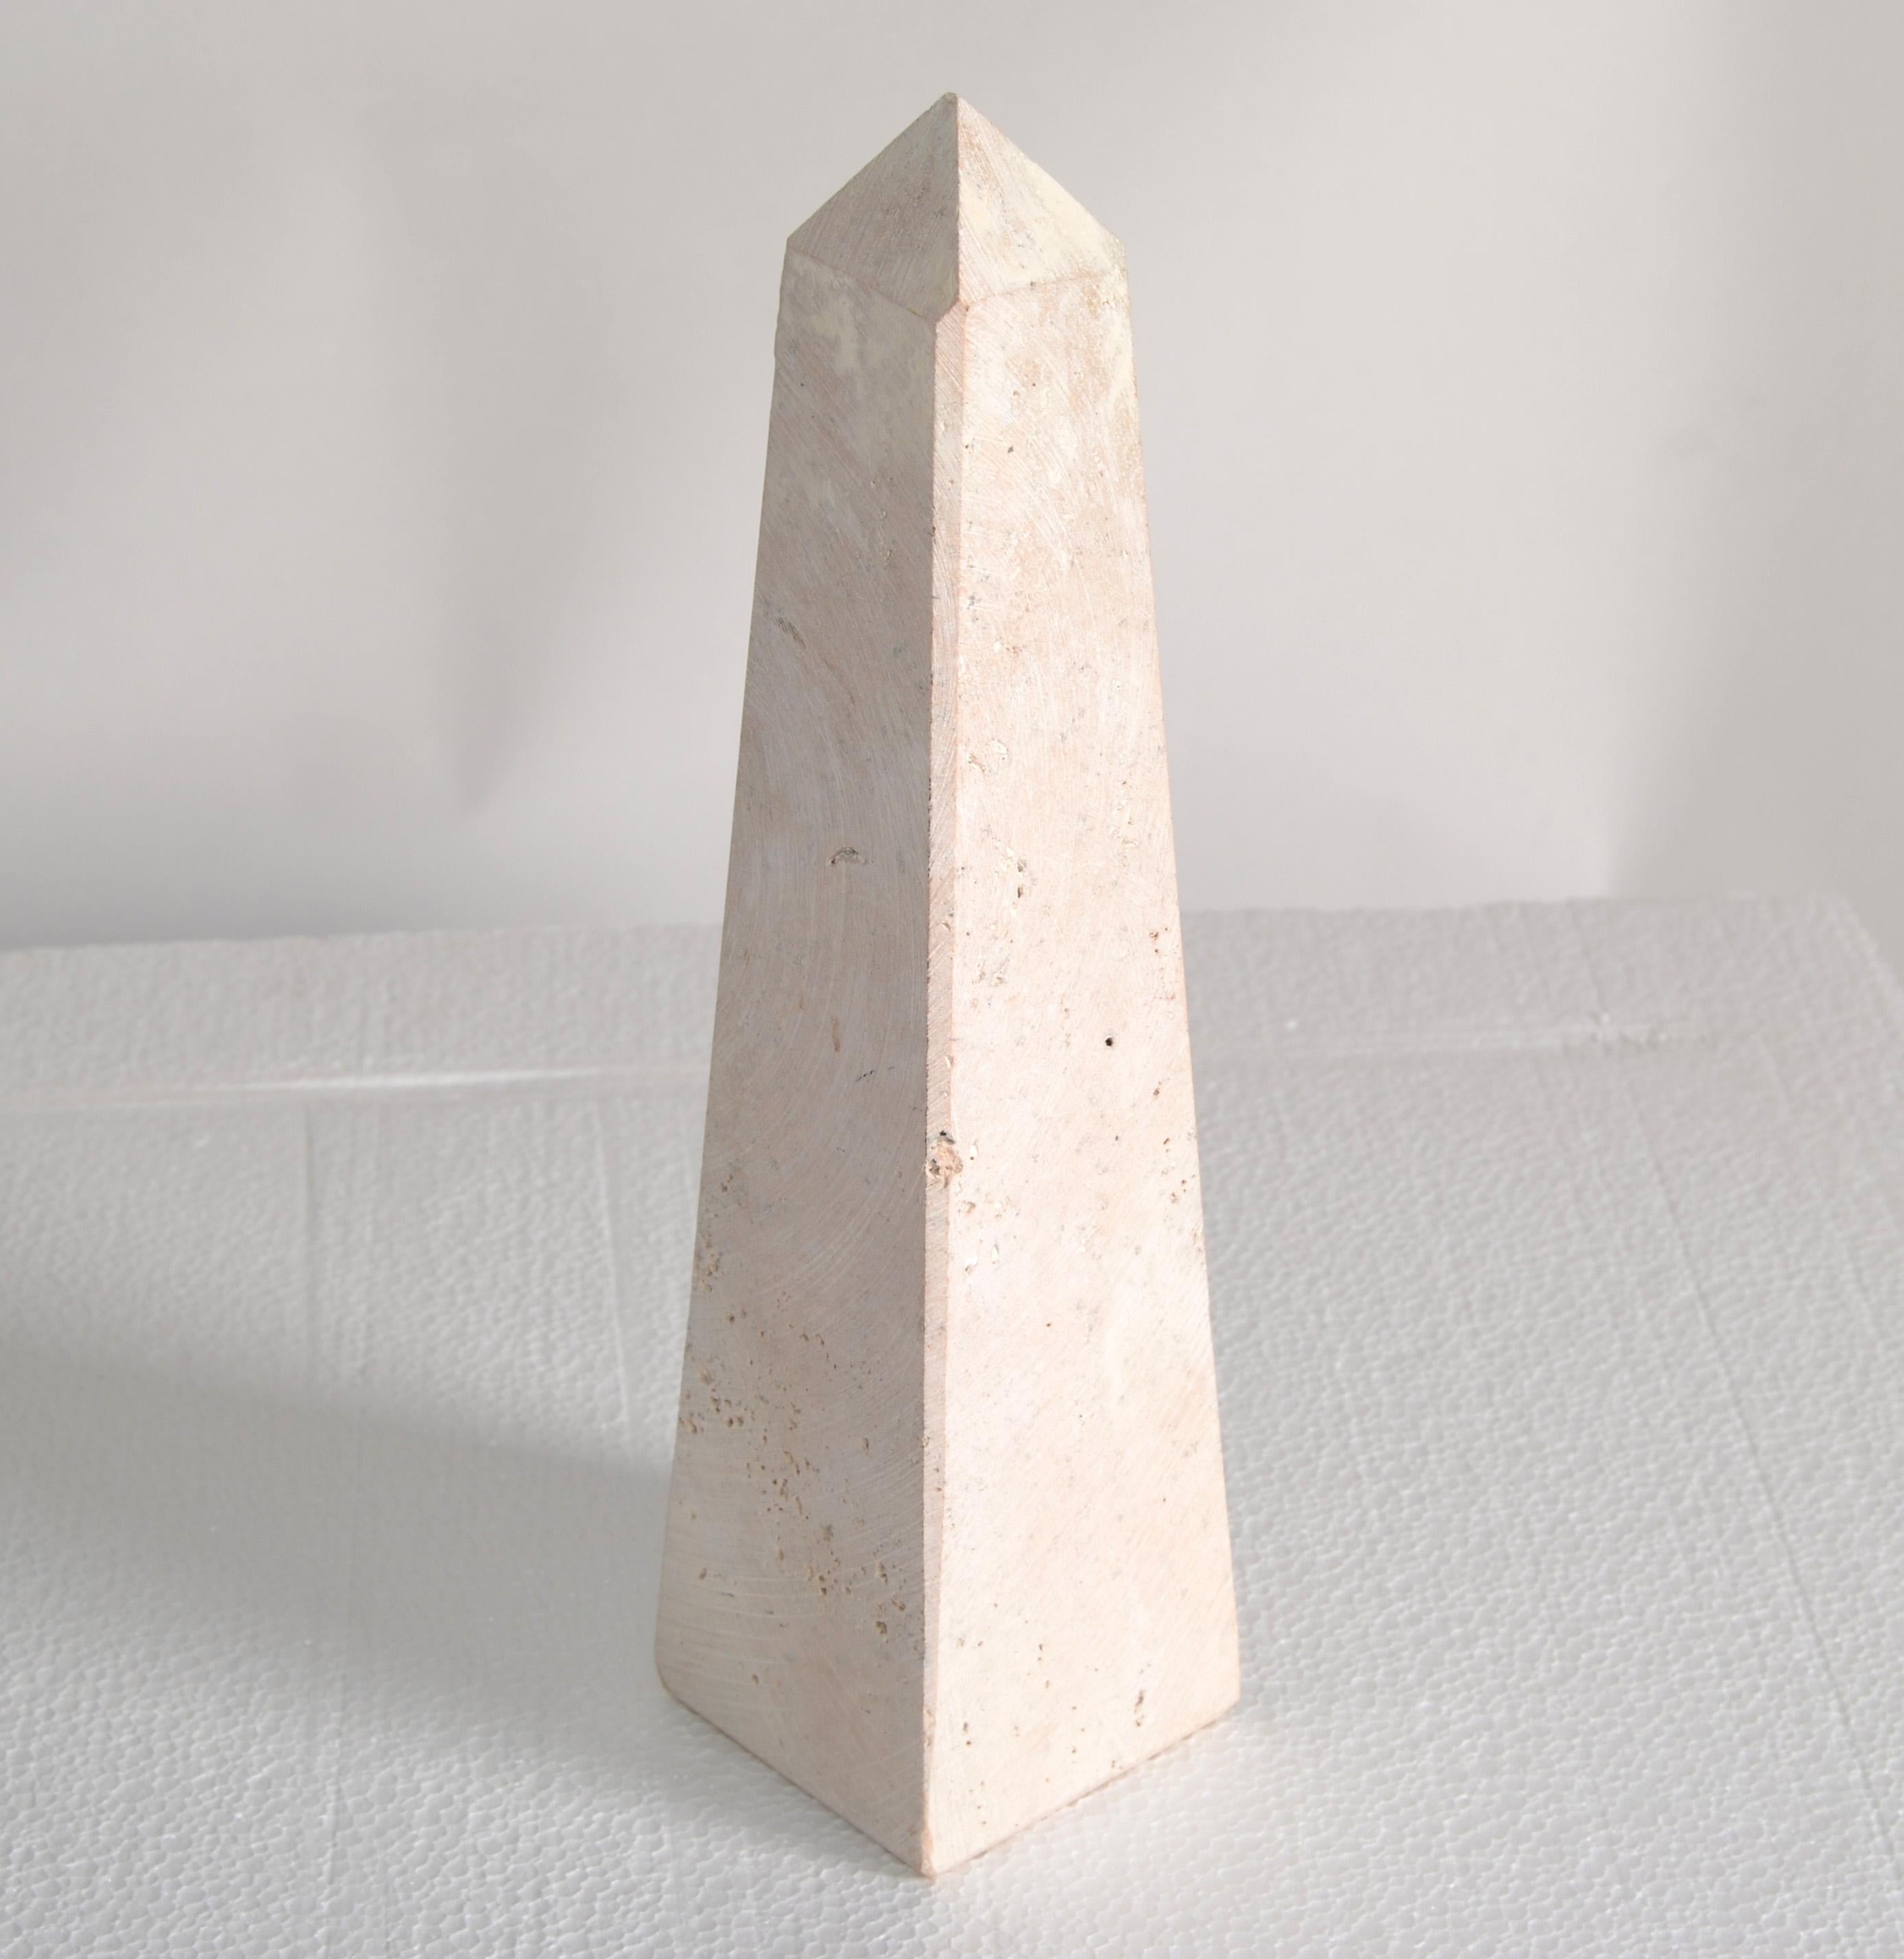 1980s Italian Beige Travertine Stone Obelisk in the Style of Grand Tour.
Look great as display and also very useful as bookends.
Handcrafted and Parts of Label at the base.
